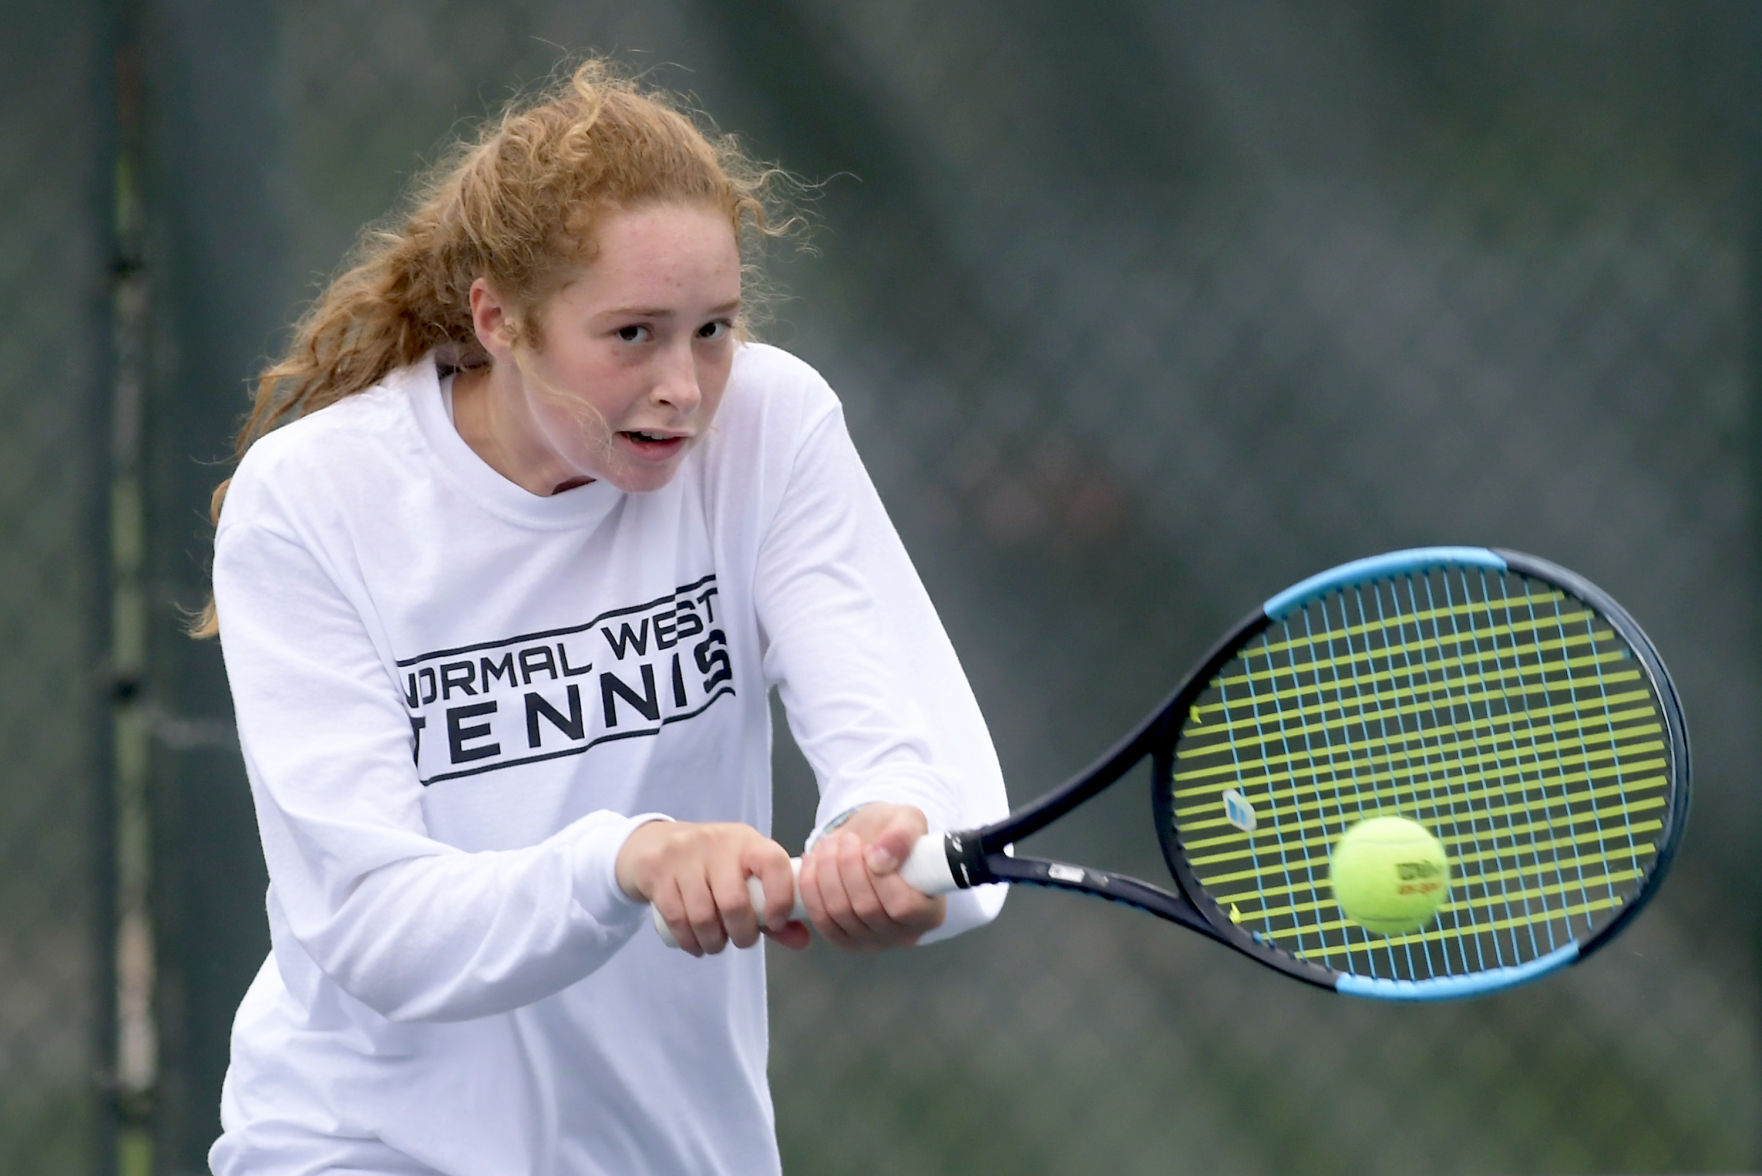 Wests Madeline Gentry wont have familiar foes in Class 2A sectional tennis